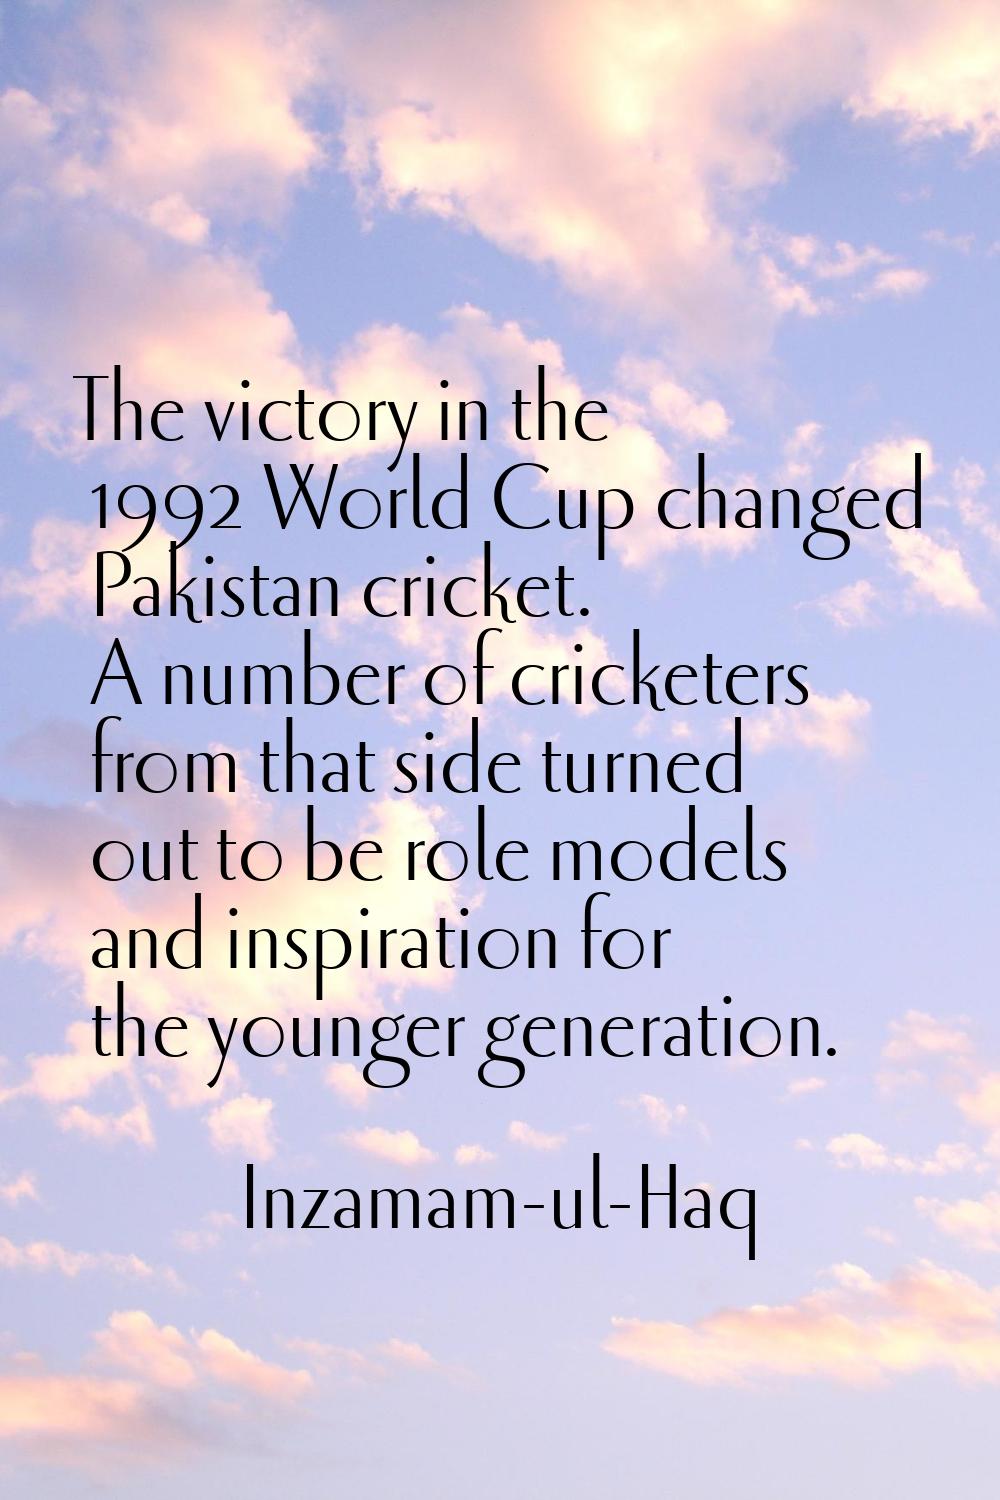 The victory in the 1992 World Cup changed Pakistan cricket. A number of cricketers from that side t